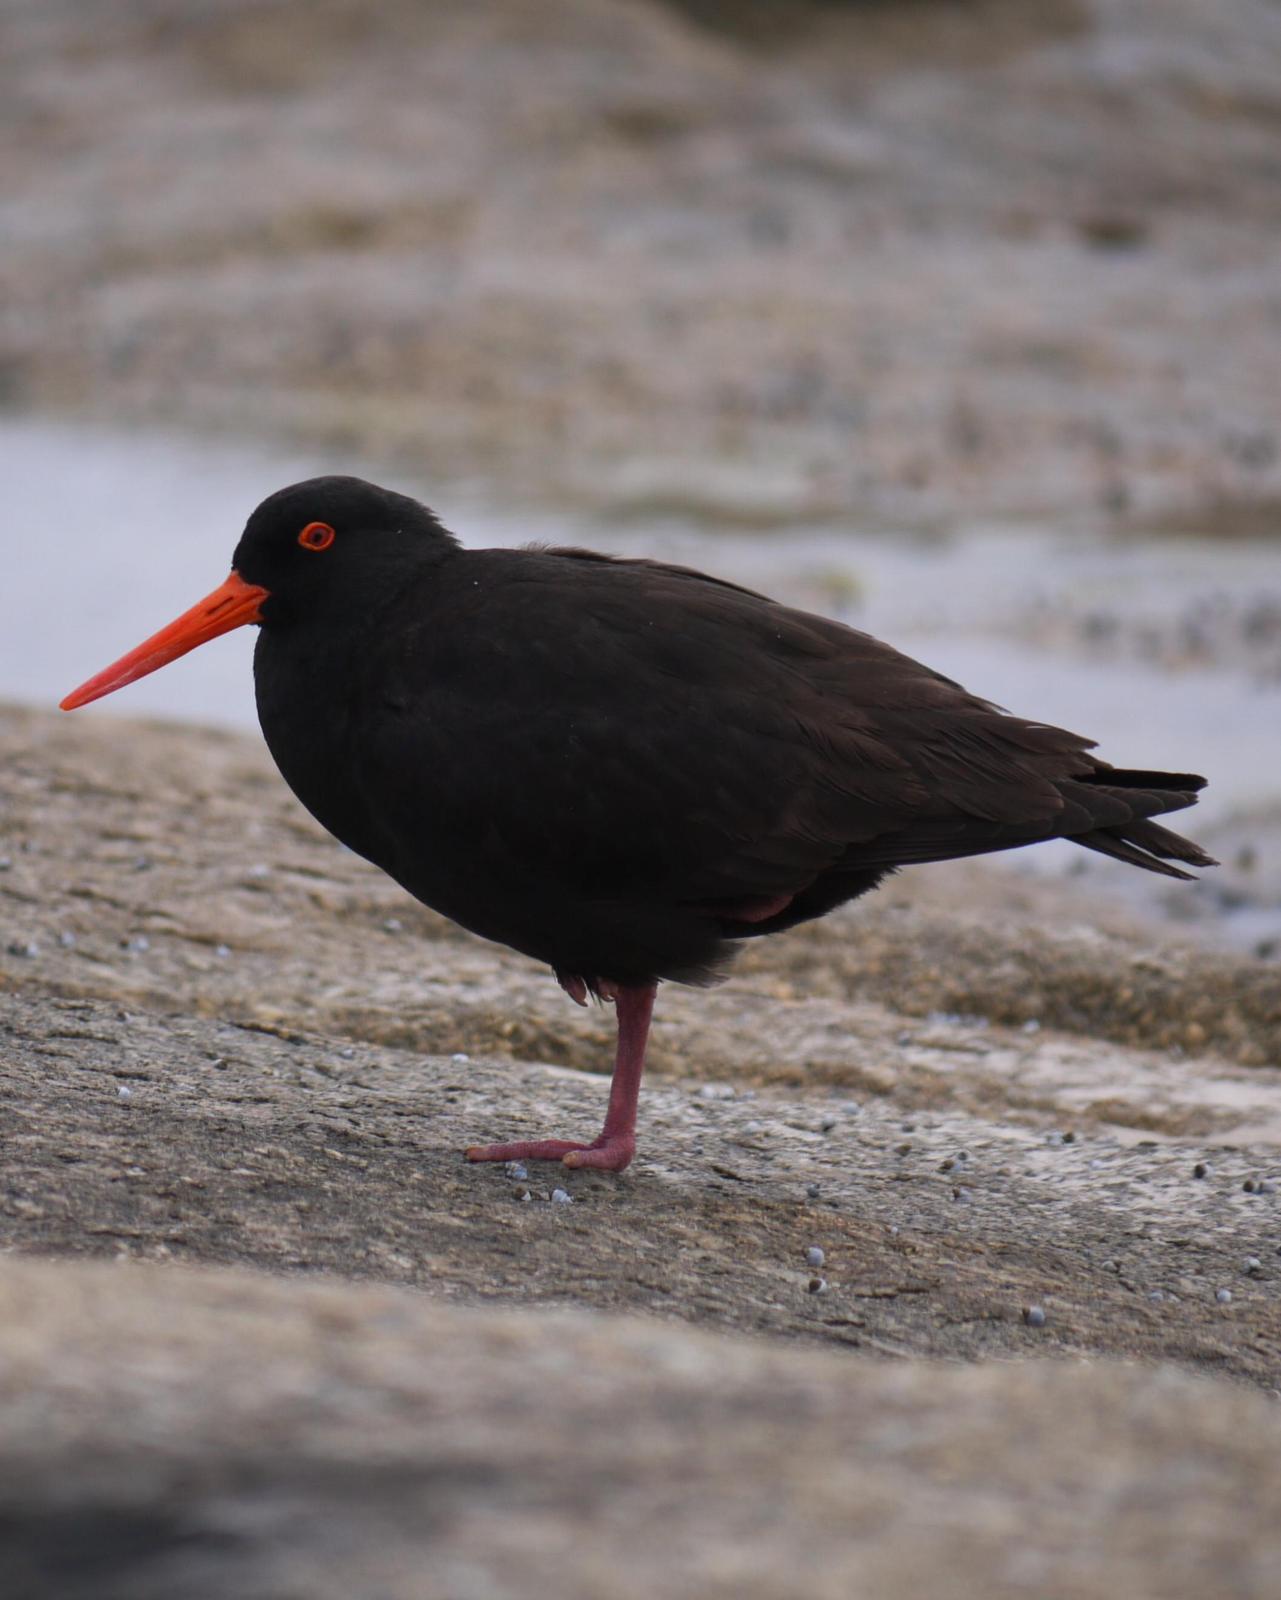 Sooty Oystercatcher Photo by Peter Lowe